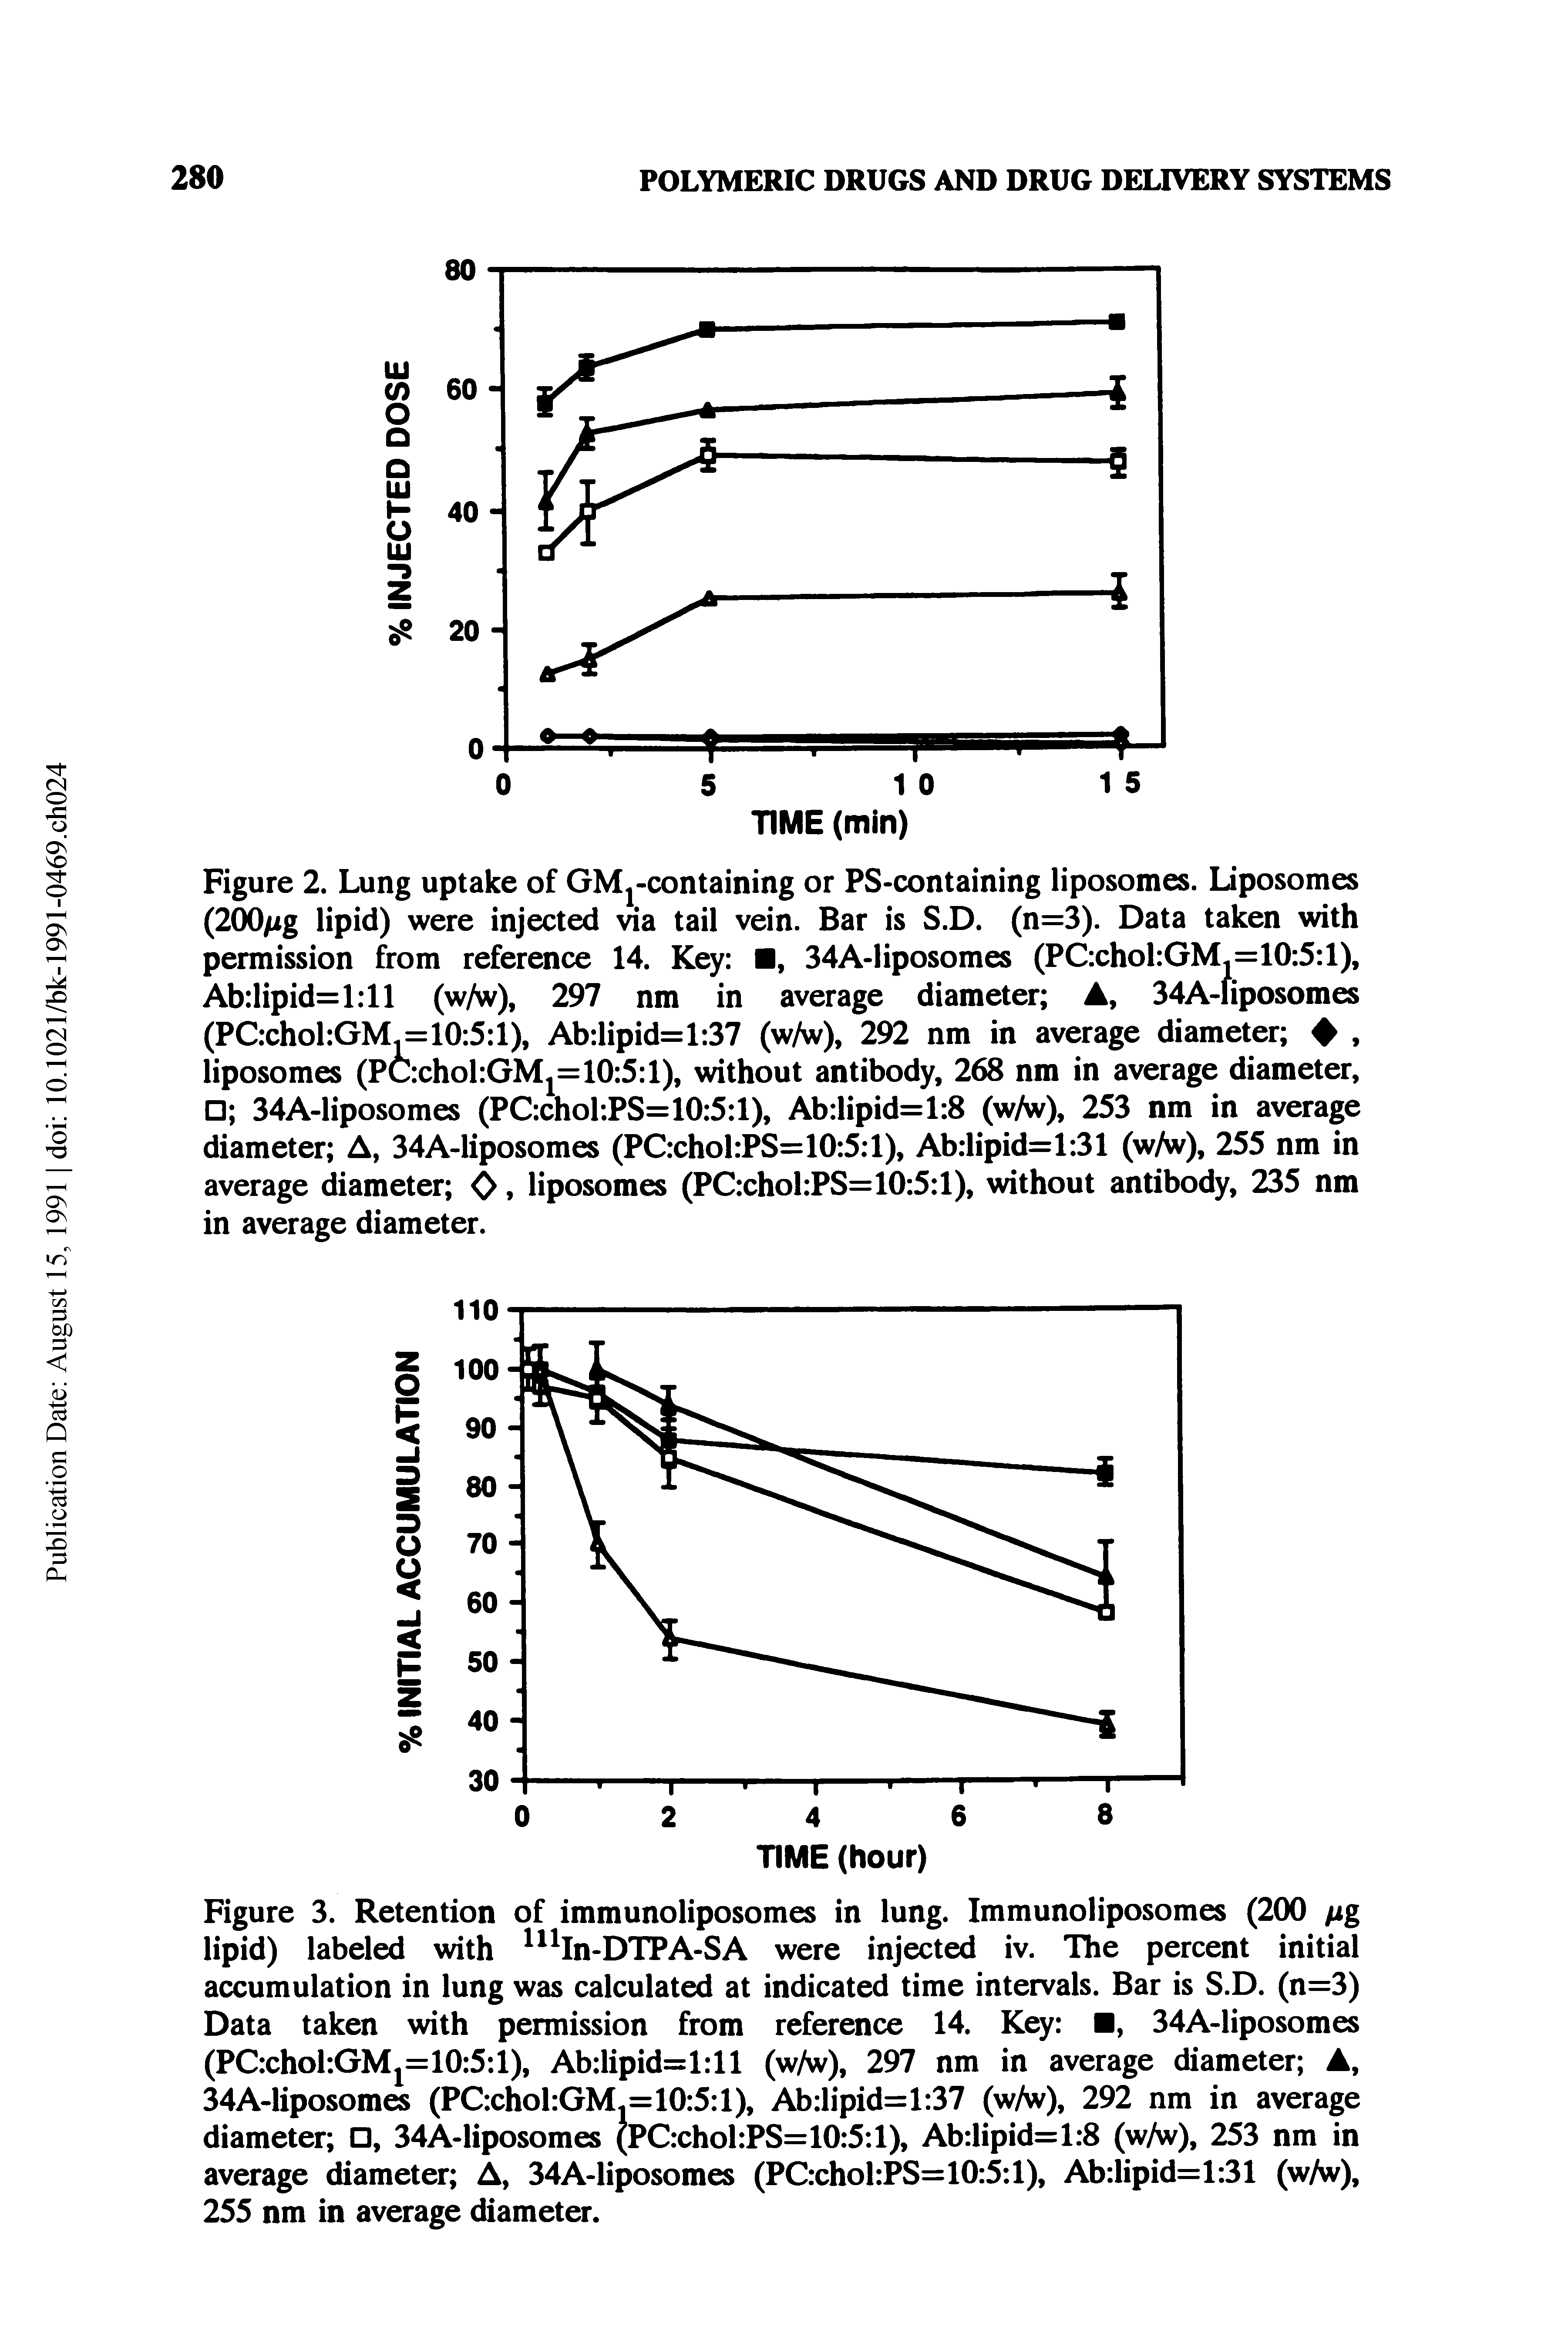 Figure 3. Retention of immunoliposomes in lung. Immunoliposomes (200 /ig lipid) labeled with lxlIn-DTPA-SA were injected iv. The percent initial accumulation in lung was calculated at indicated time intervals. Bar is S.D. (n=3) Data taken with permission from reference 14. Key , 34A-liposomes (PC chol GMx=10 5 l), Ab lipid= 1 11 (w/w), 297 nm in average diameter A, 34A-liposomes (PC chol GM.=10 5 1), Ab lipid=l 37 (w/w), 292 nm in average diameter , 34A-liposomes (PC chol PS=10 5 1), Ab lipid=l 8 (w/w), 253 nm in average diameter A, 34A-liposomes (PC chol PS=10 5 1), Ab lipid=l 31 (w/w), 255 nm in average diameter.